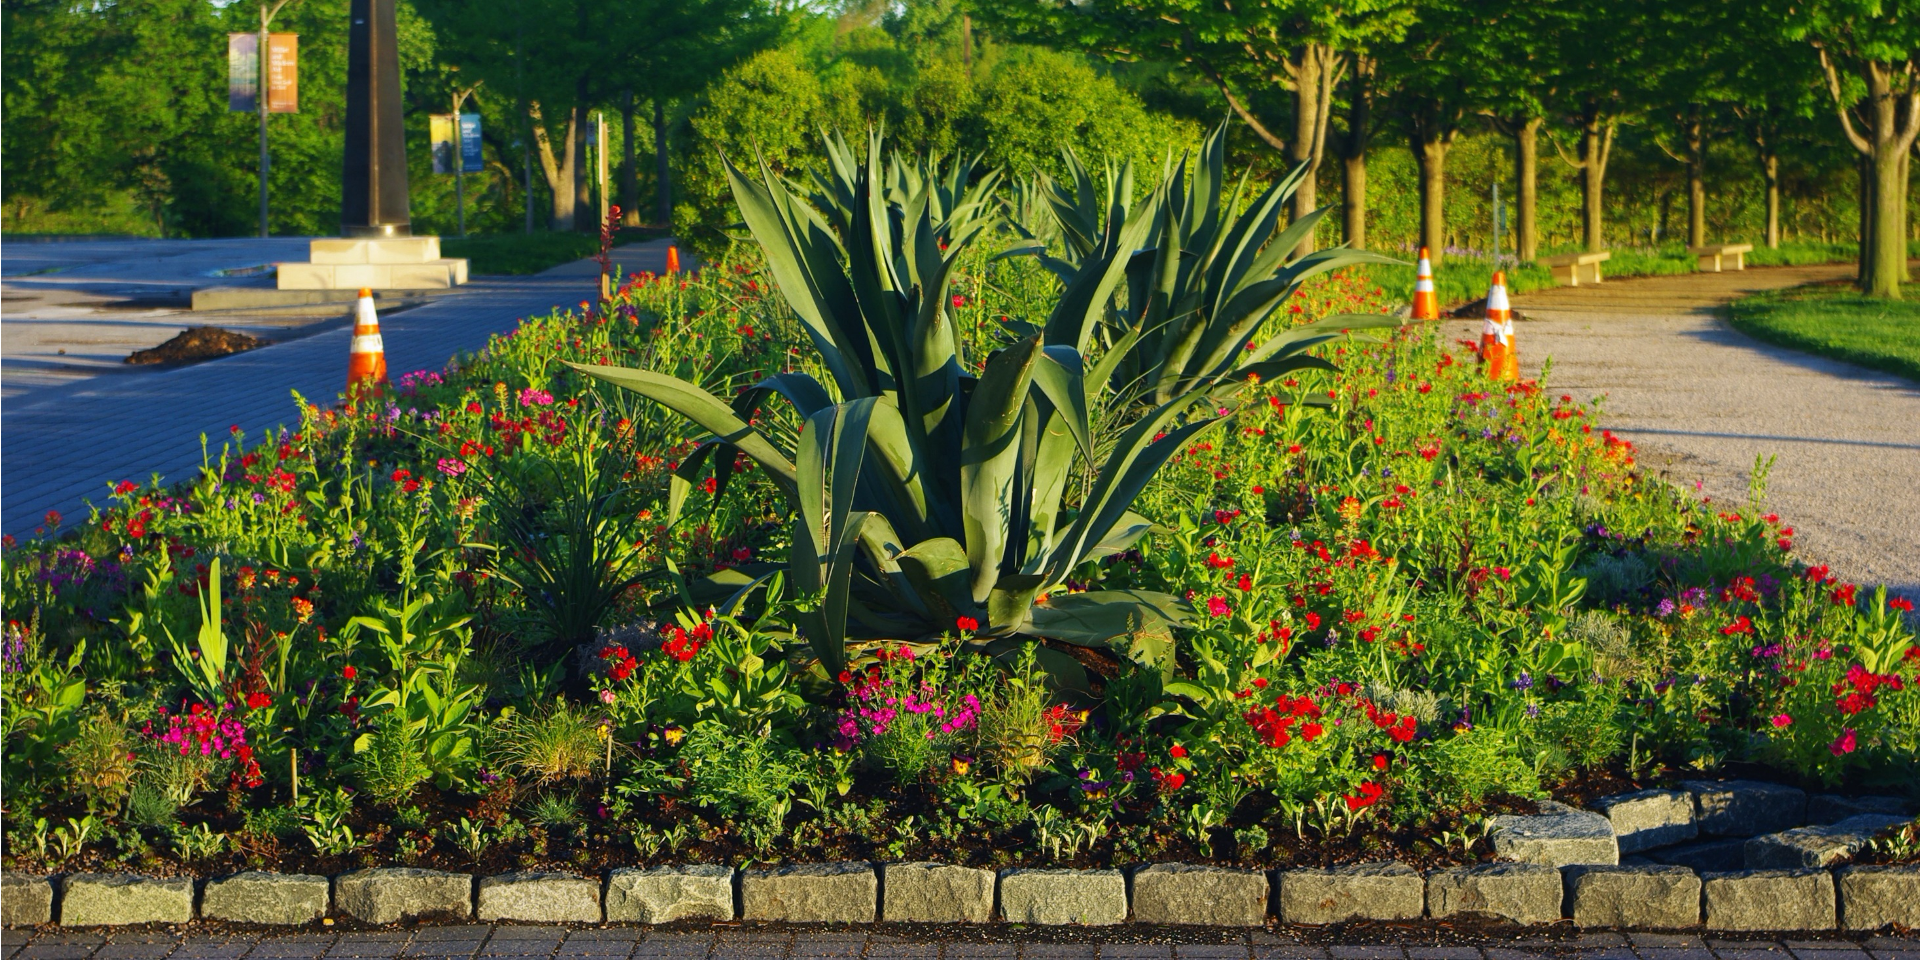 April 2020: spring Annual Phlox, Texas Bluebonnets and Texas Paintbrush began to bloom amongst the newly planted Agaves.